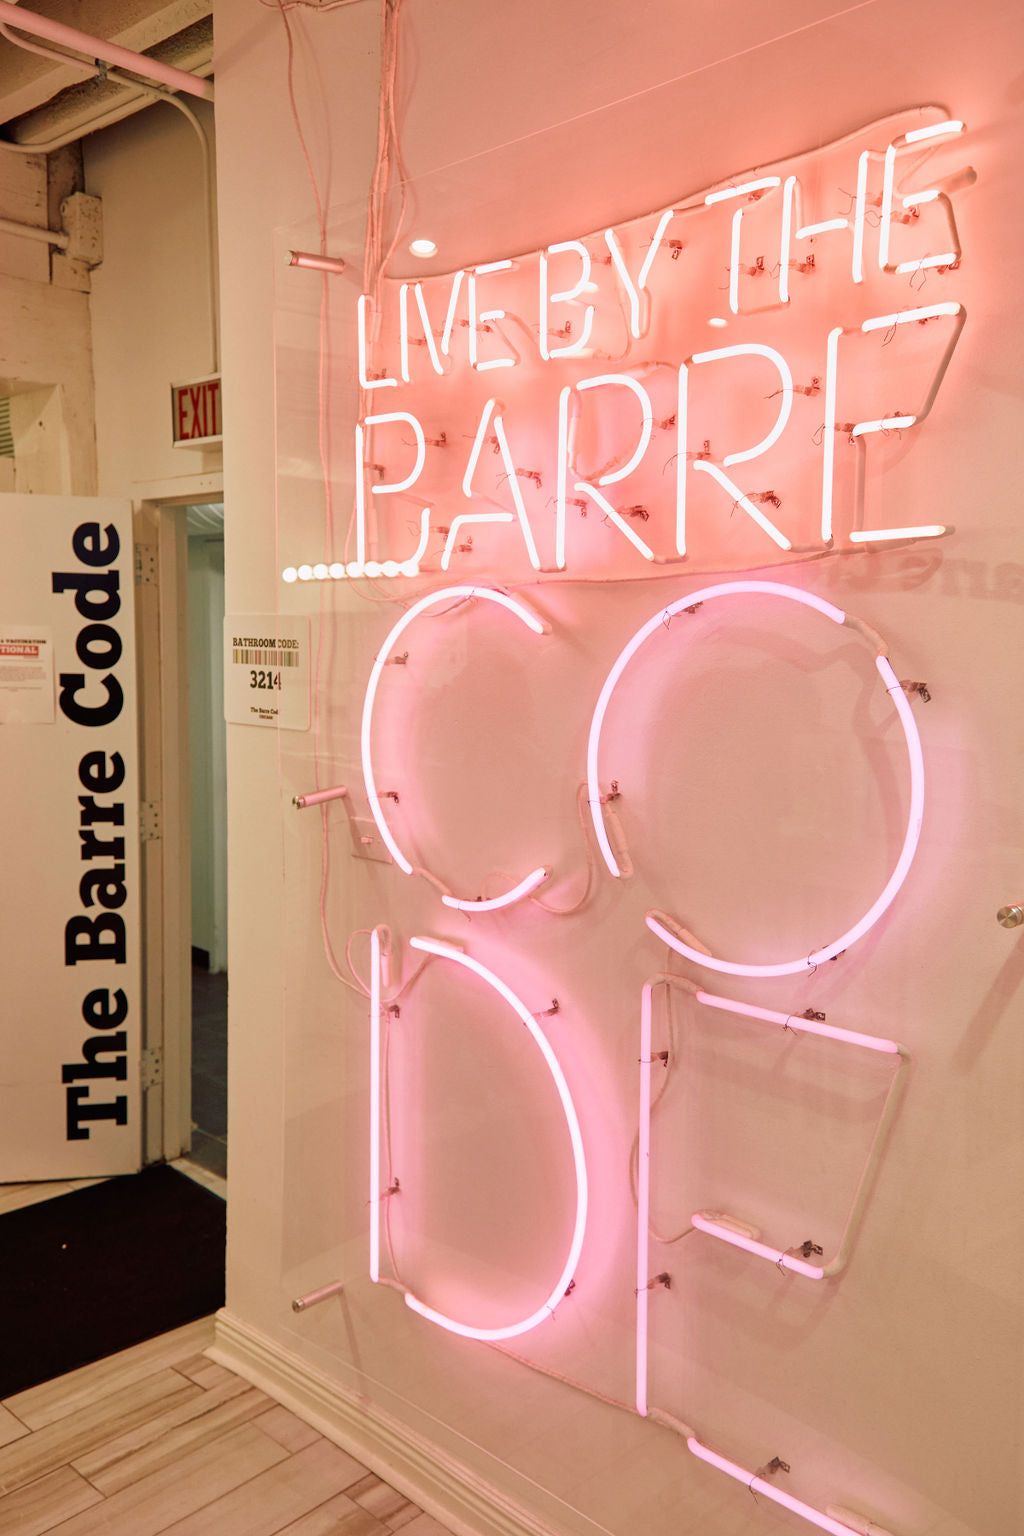 The Barre Code's famous photo opp and neon sign